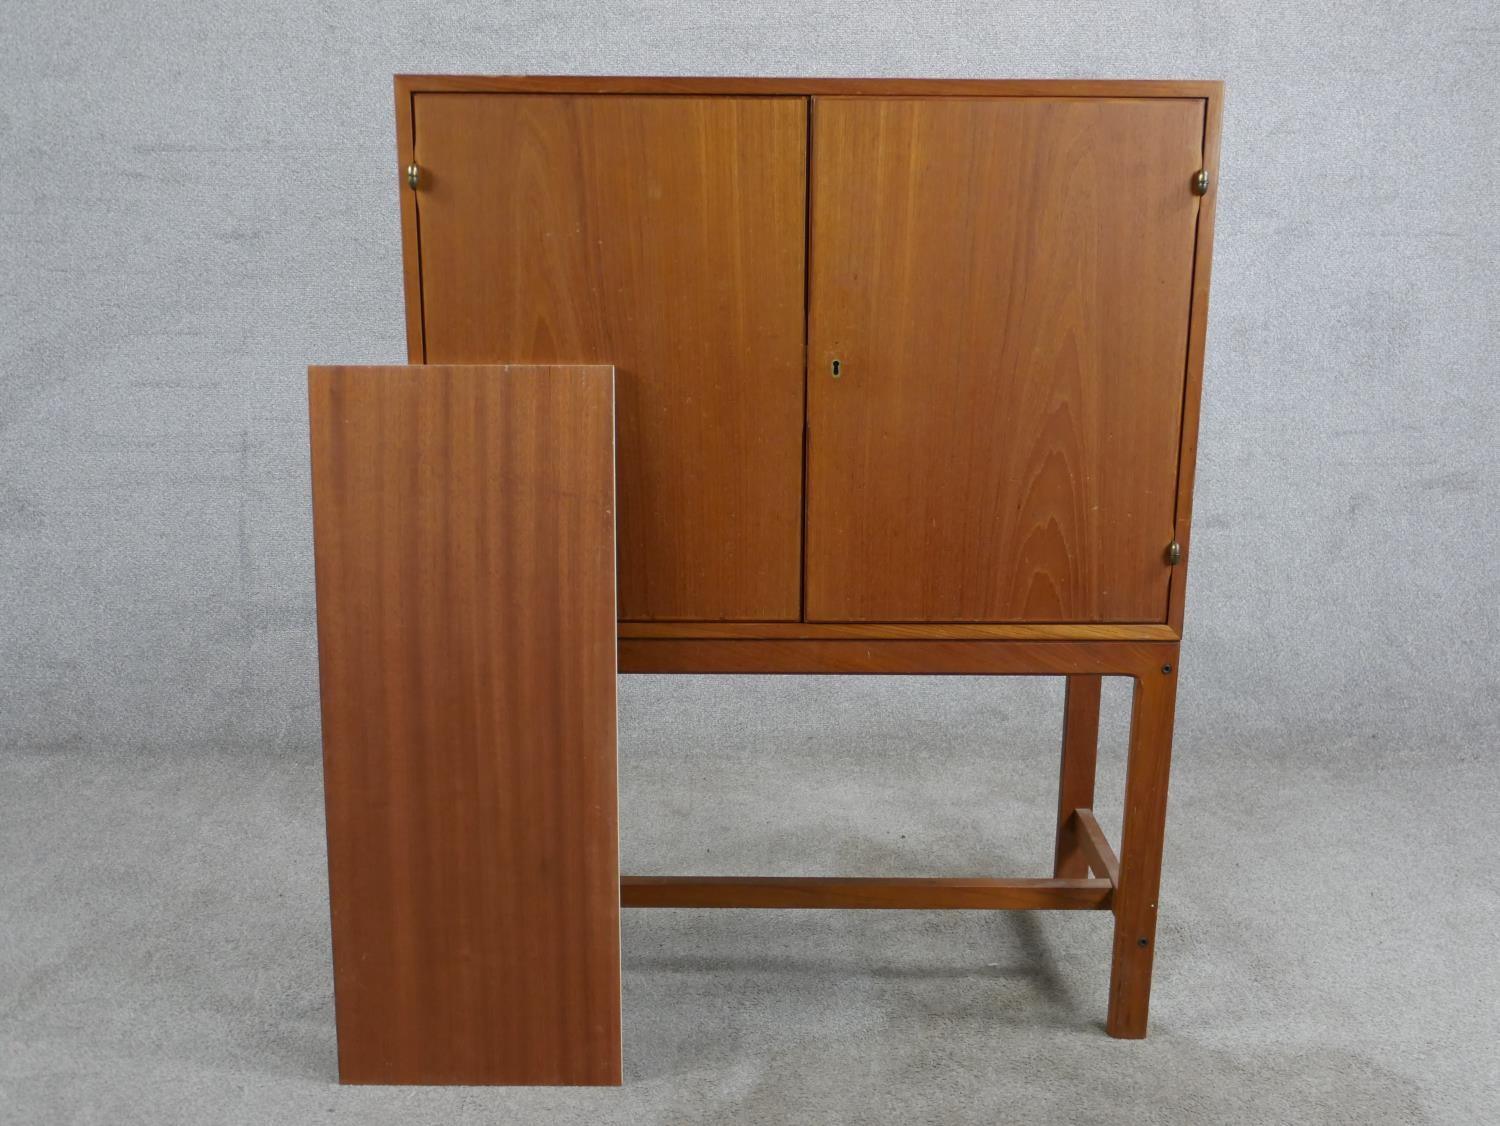 A mid 20th century Danish teak two door cupboard, opening to reveal three shelves, raised on